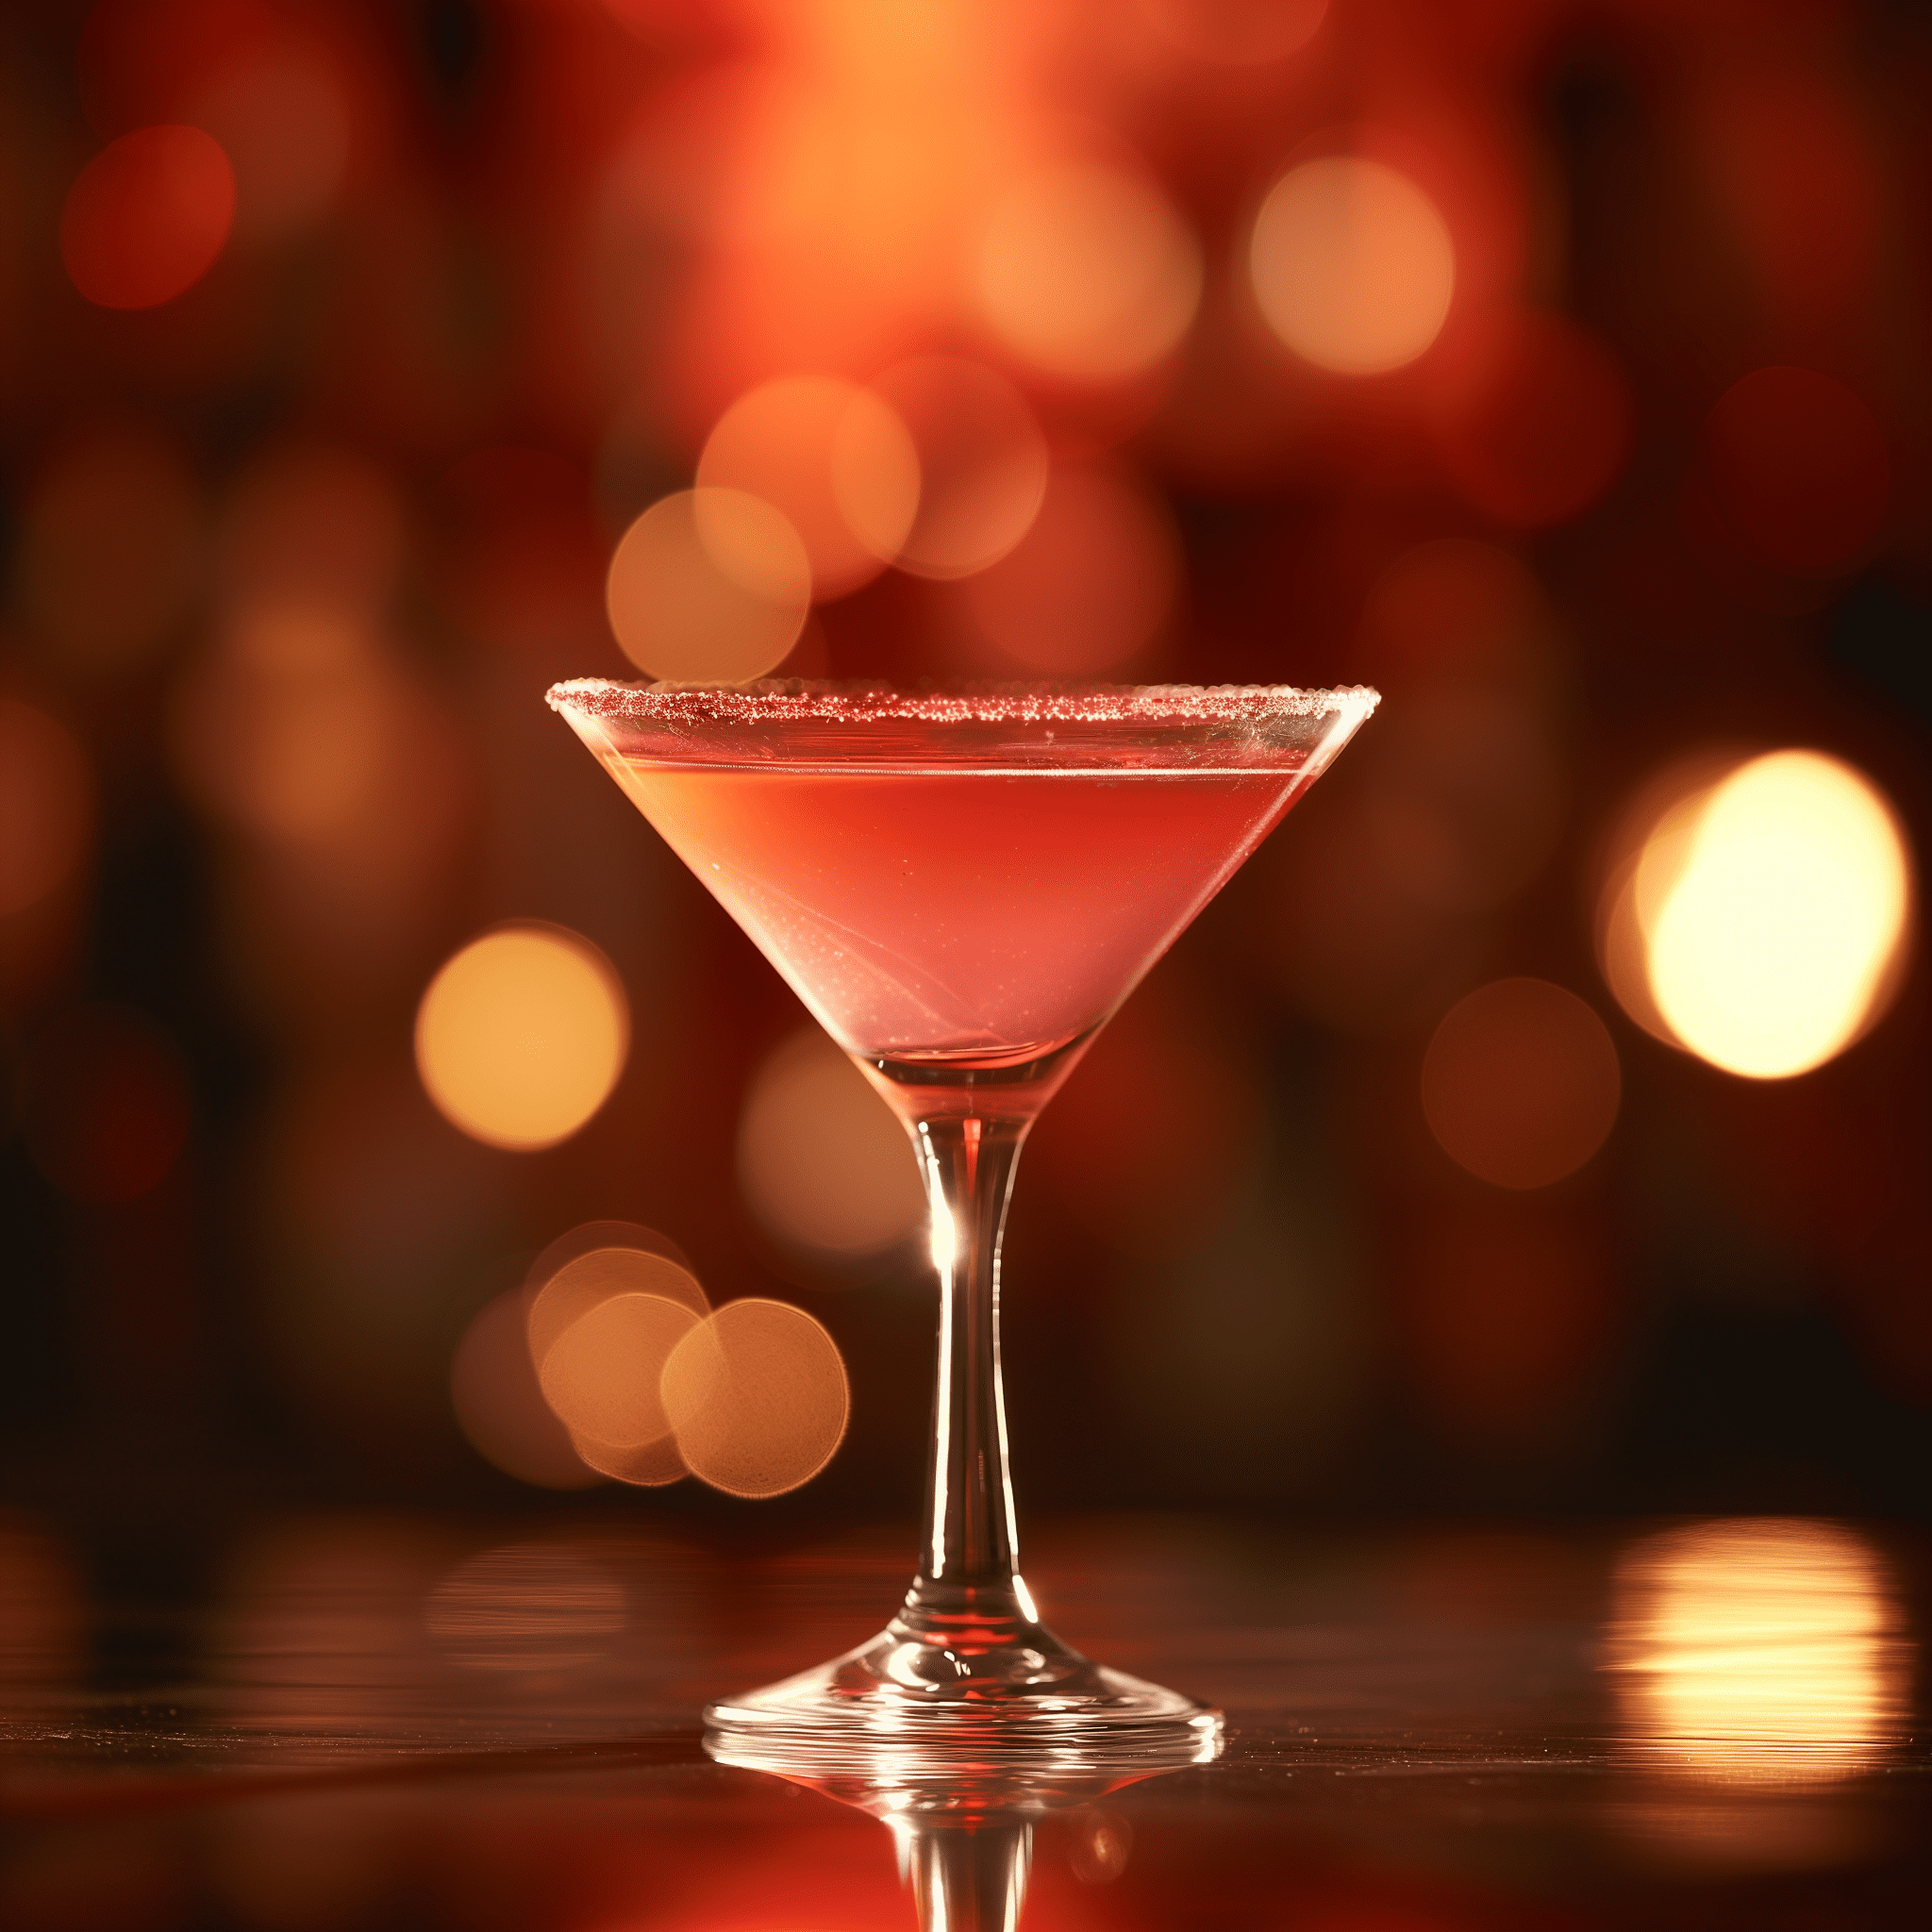 Cosmo Rita Cocktail Recipe - The Cosmo Rita offers a tantalizing balance of sweet and sour, with a robust tequila foundation. The cranberry juice provides a fruity tartness, while the lime juice adds a refreshing zing. The triple sec rounds out the flavor with a subtle orange sweetness.